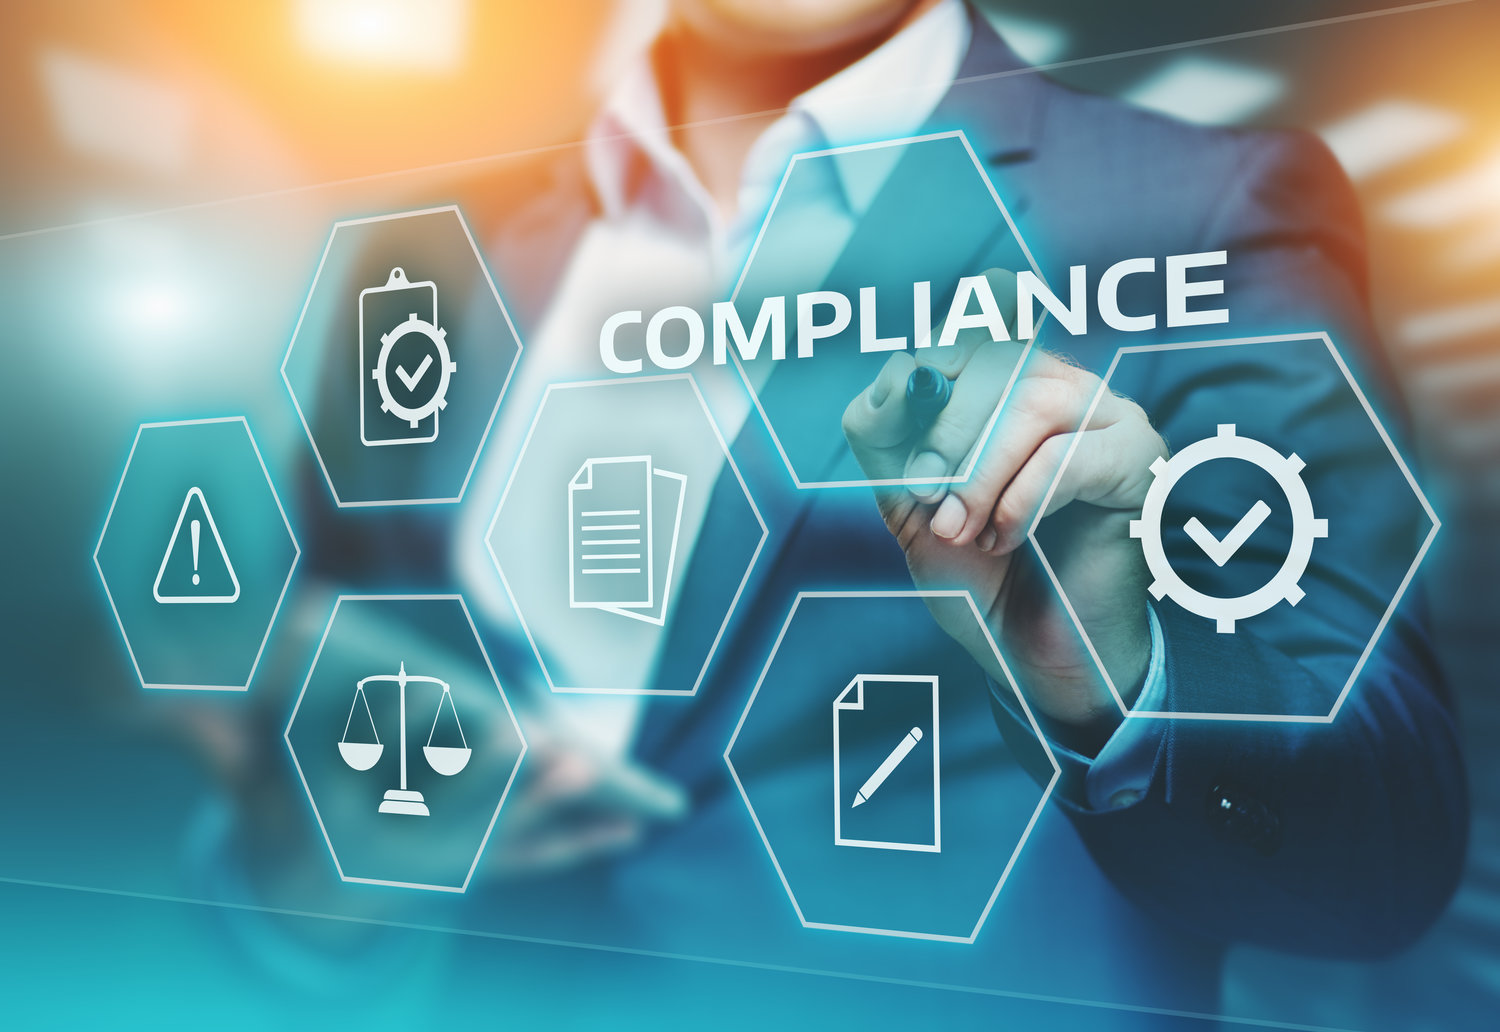 What Are The Benefits Of Data Compliance